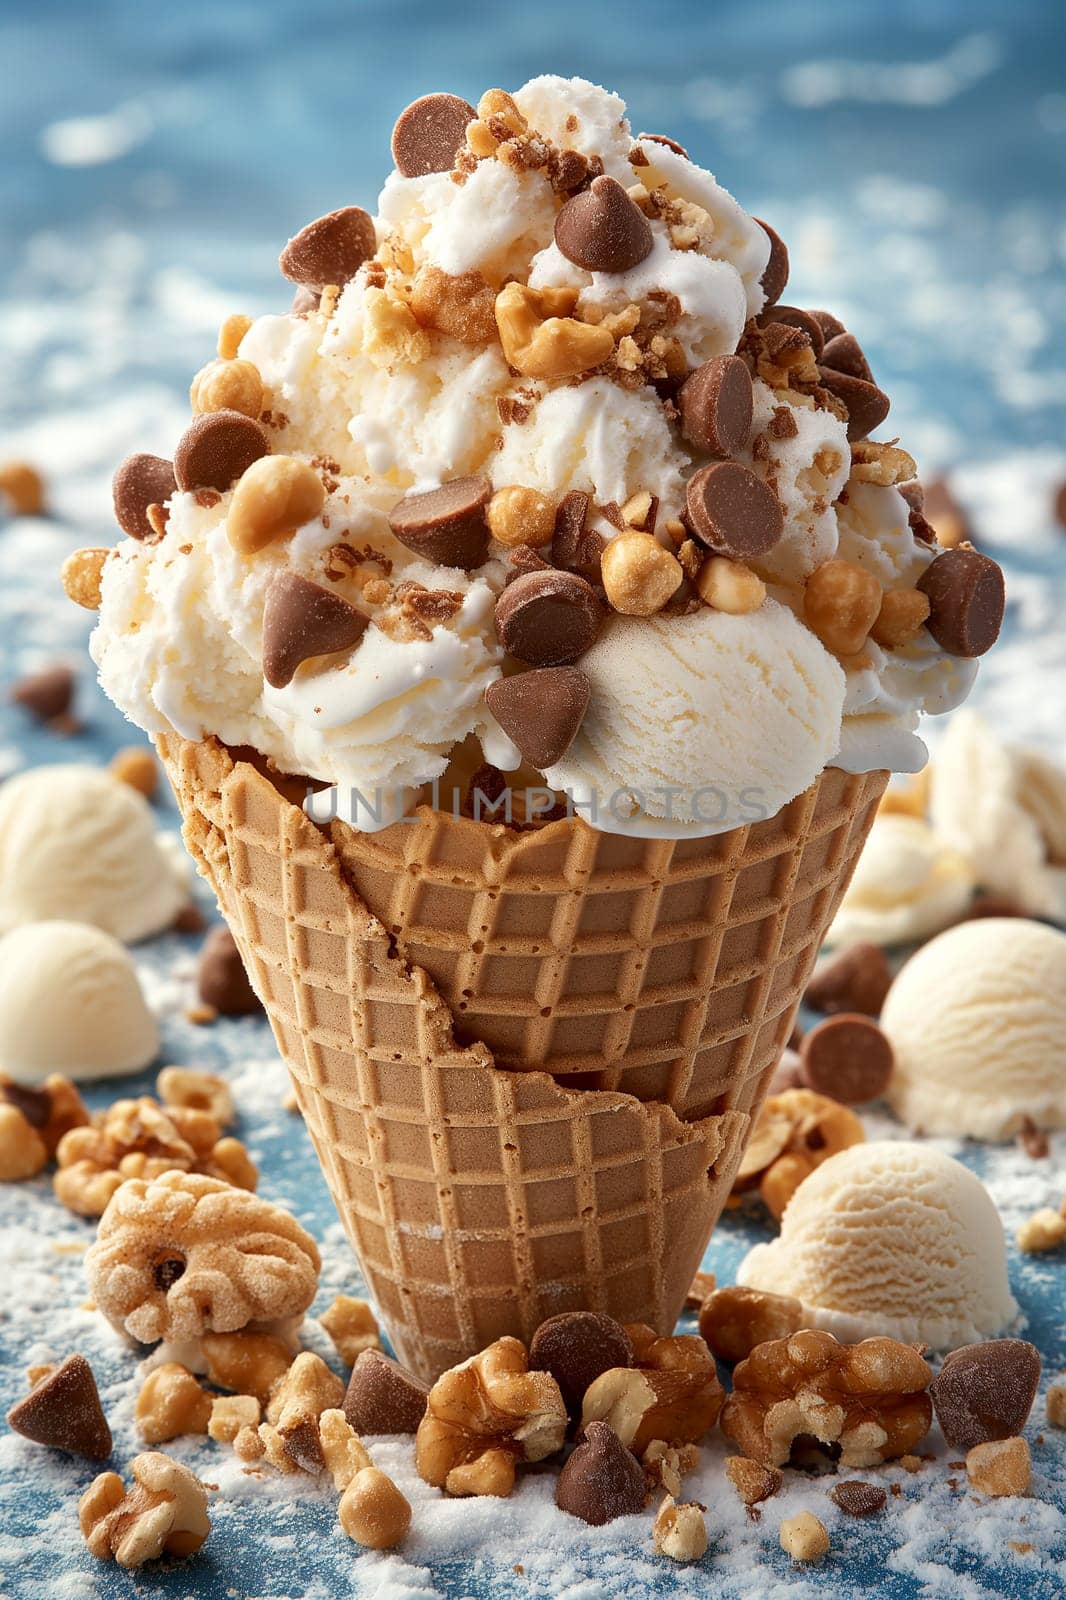 Creamy ice cream cone topped with nuts and chocolate chips.